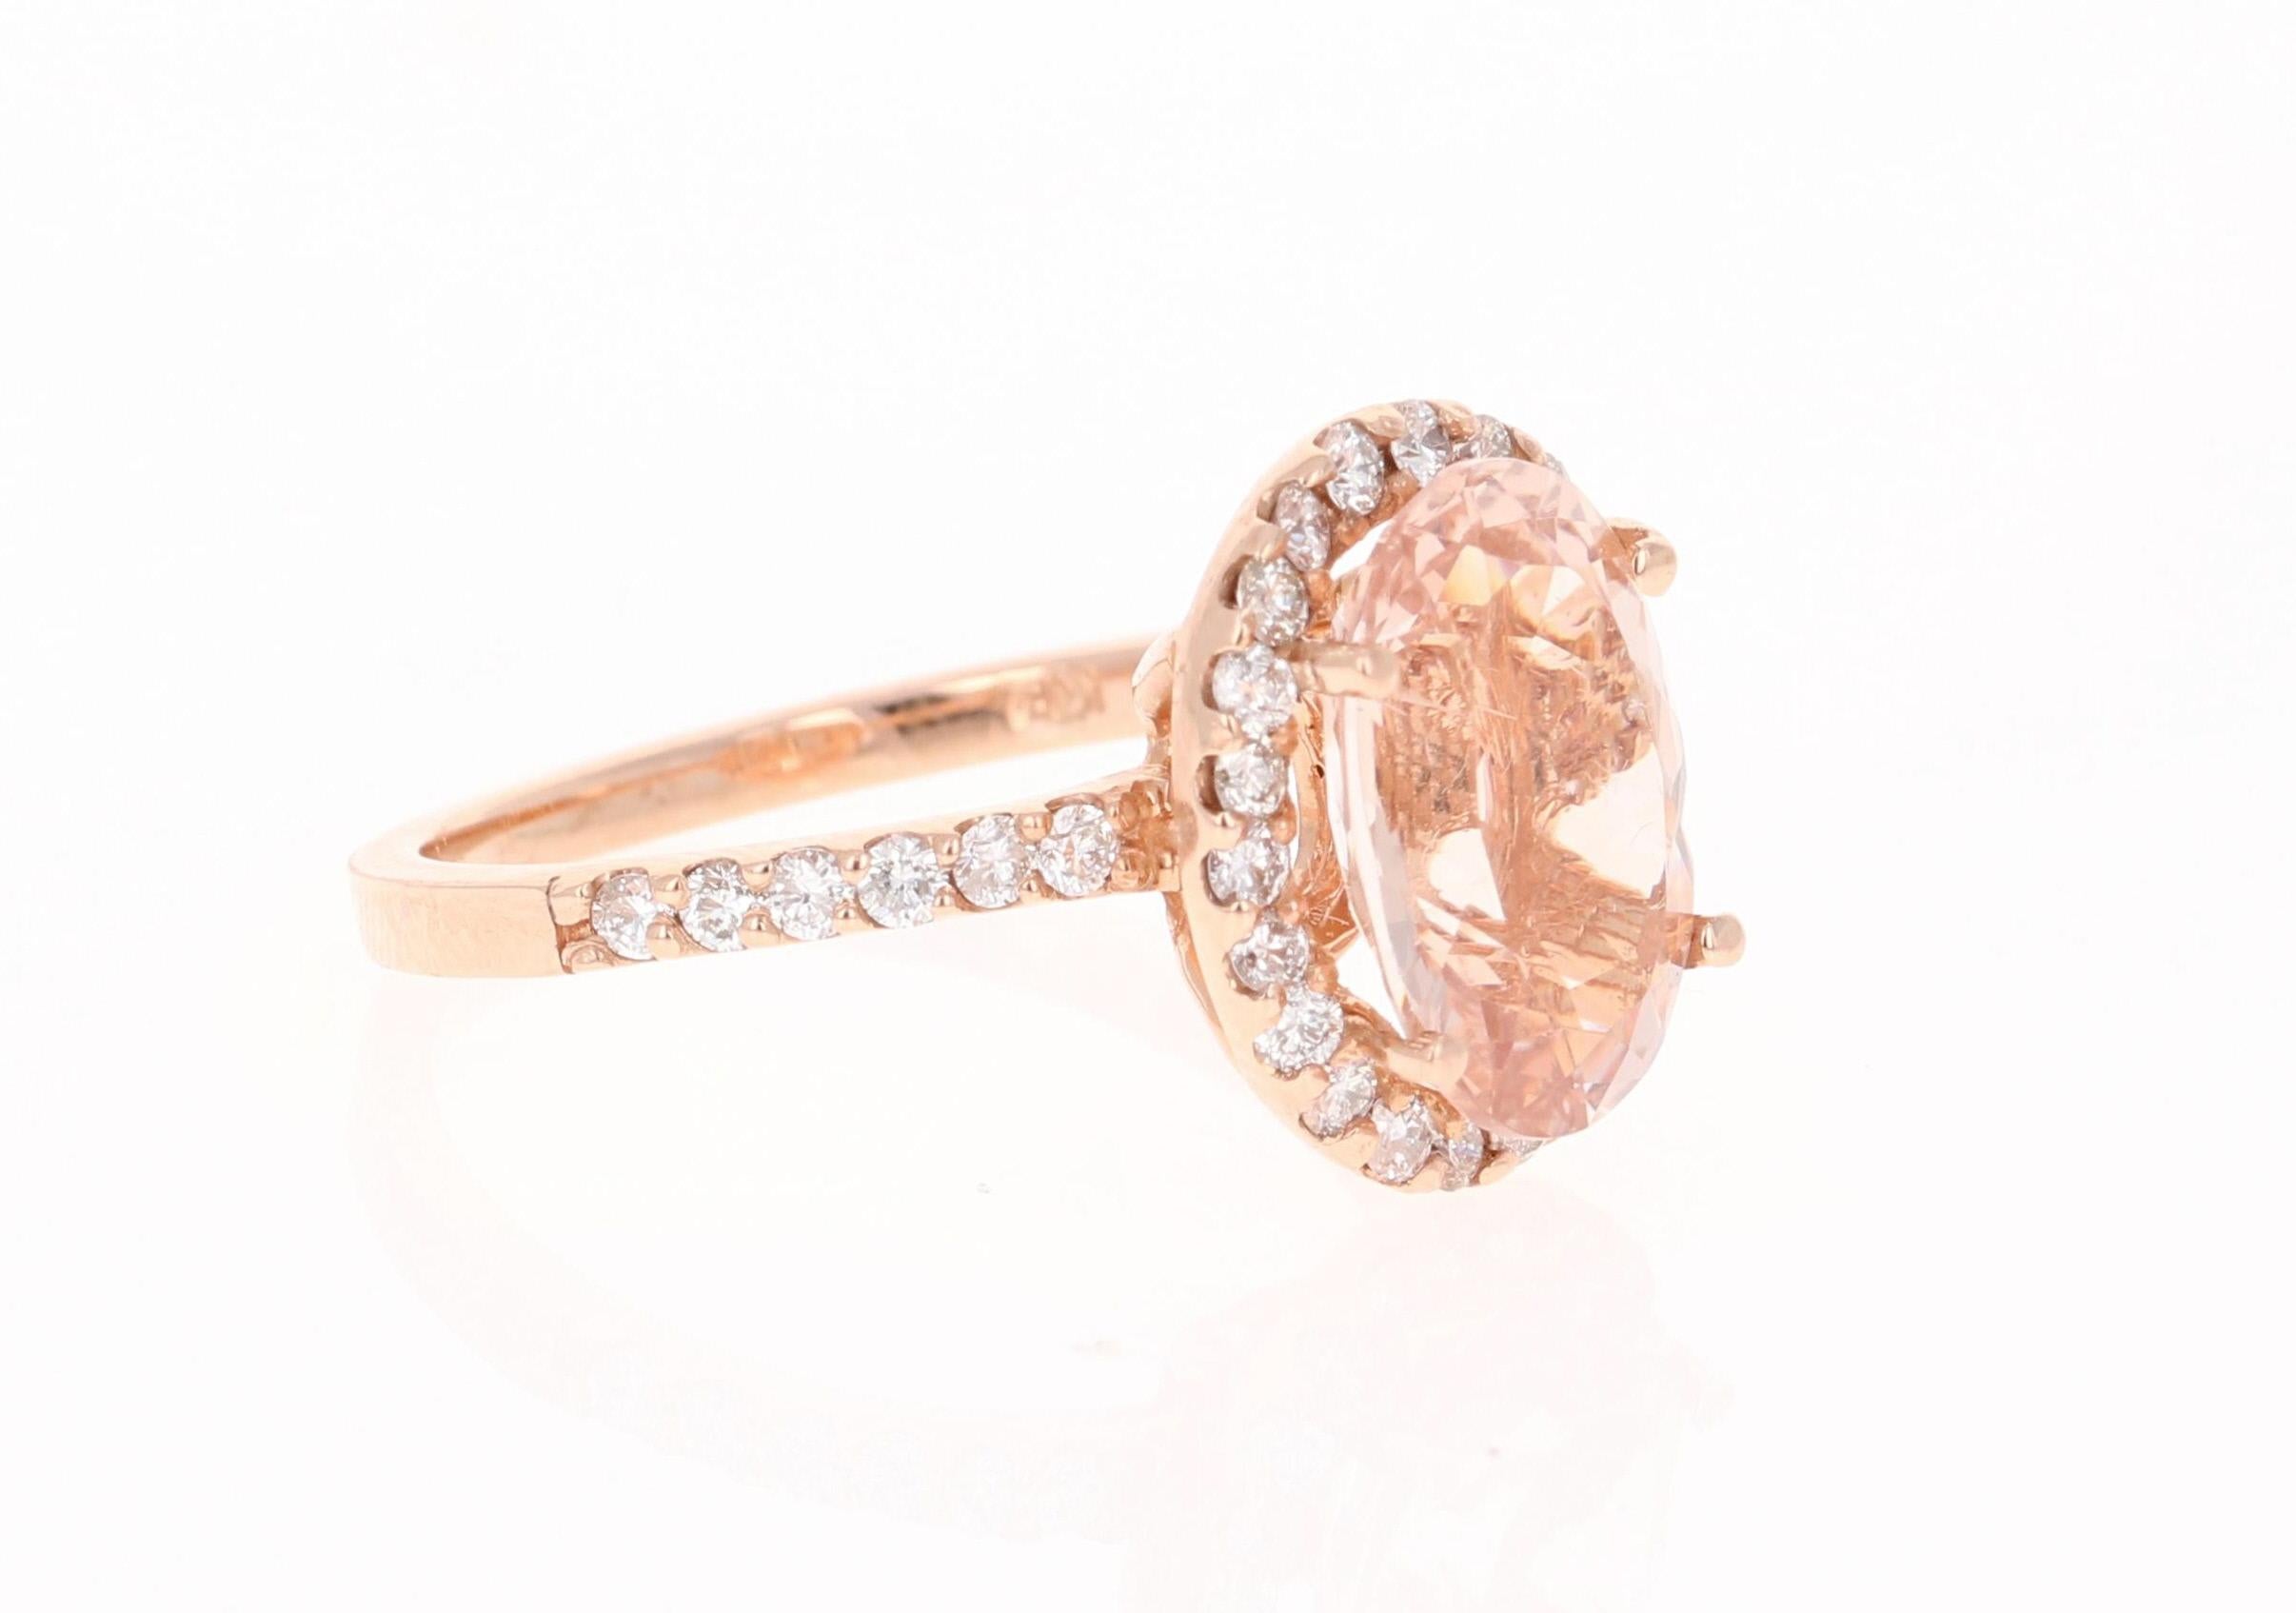 Gorgeous and Classy  Morganite Diamond Ring! 

This Morganite ring has a beautiful 2.92 Carat Oval Cut Morganite and is surrounded by a simple halo of  32 Round Cut Diamonds that weigh 0.52 Carats.  The diamonds have a clarity and color of SI-F. The